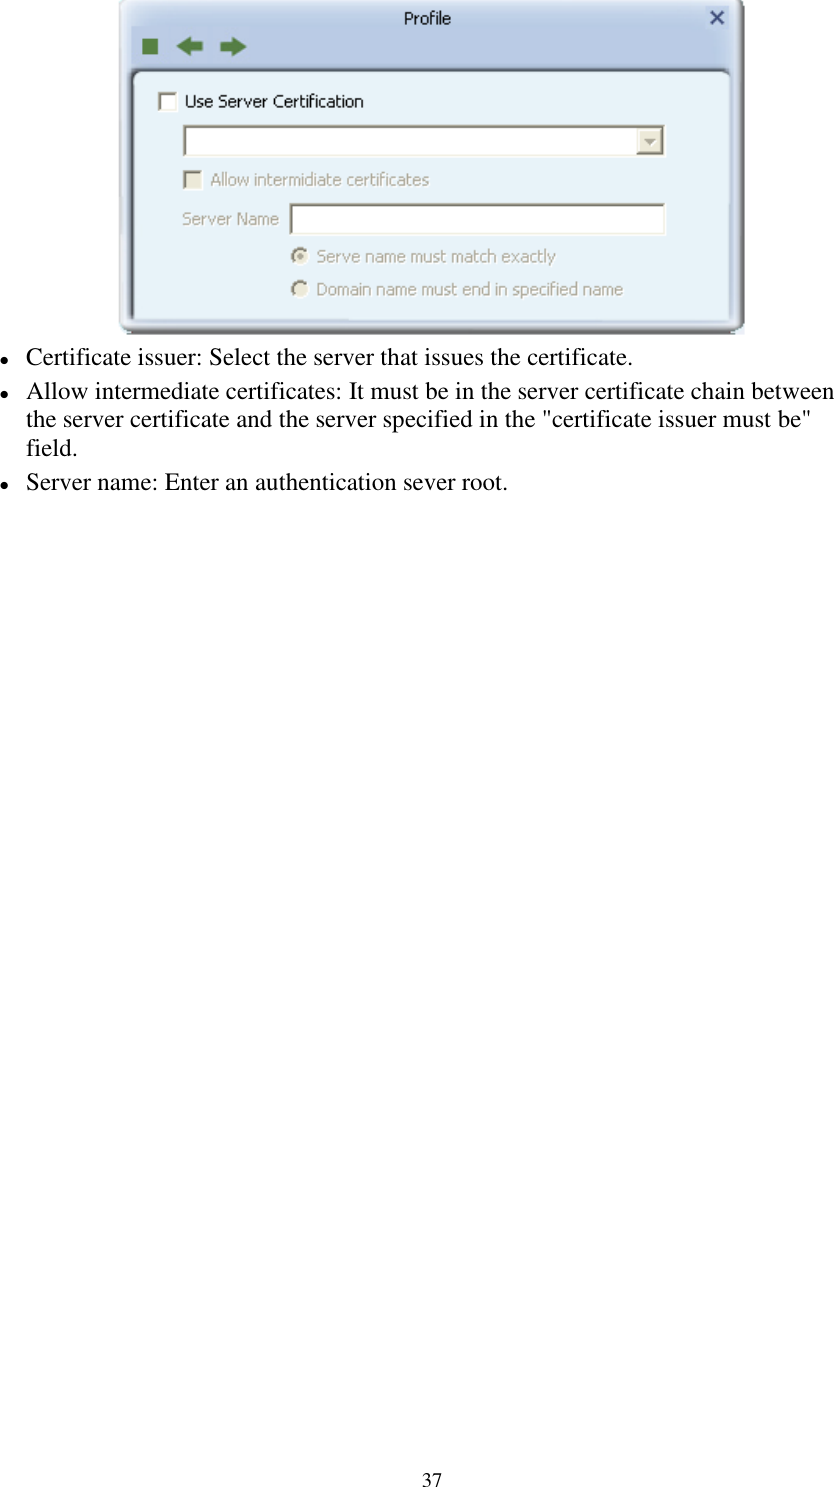 37Certificate issuer: Select the server that issues the certificate.Allow intermediate certificates: It must be in the server certificate chain betweenthe server certificate and the server specified in the &quot;certificate issuer must be&quot;field.Server name: Enter an authentication sever root.